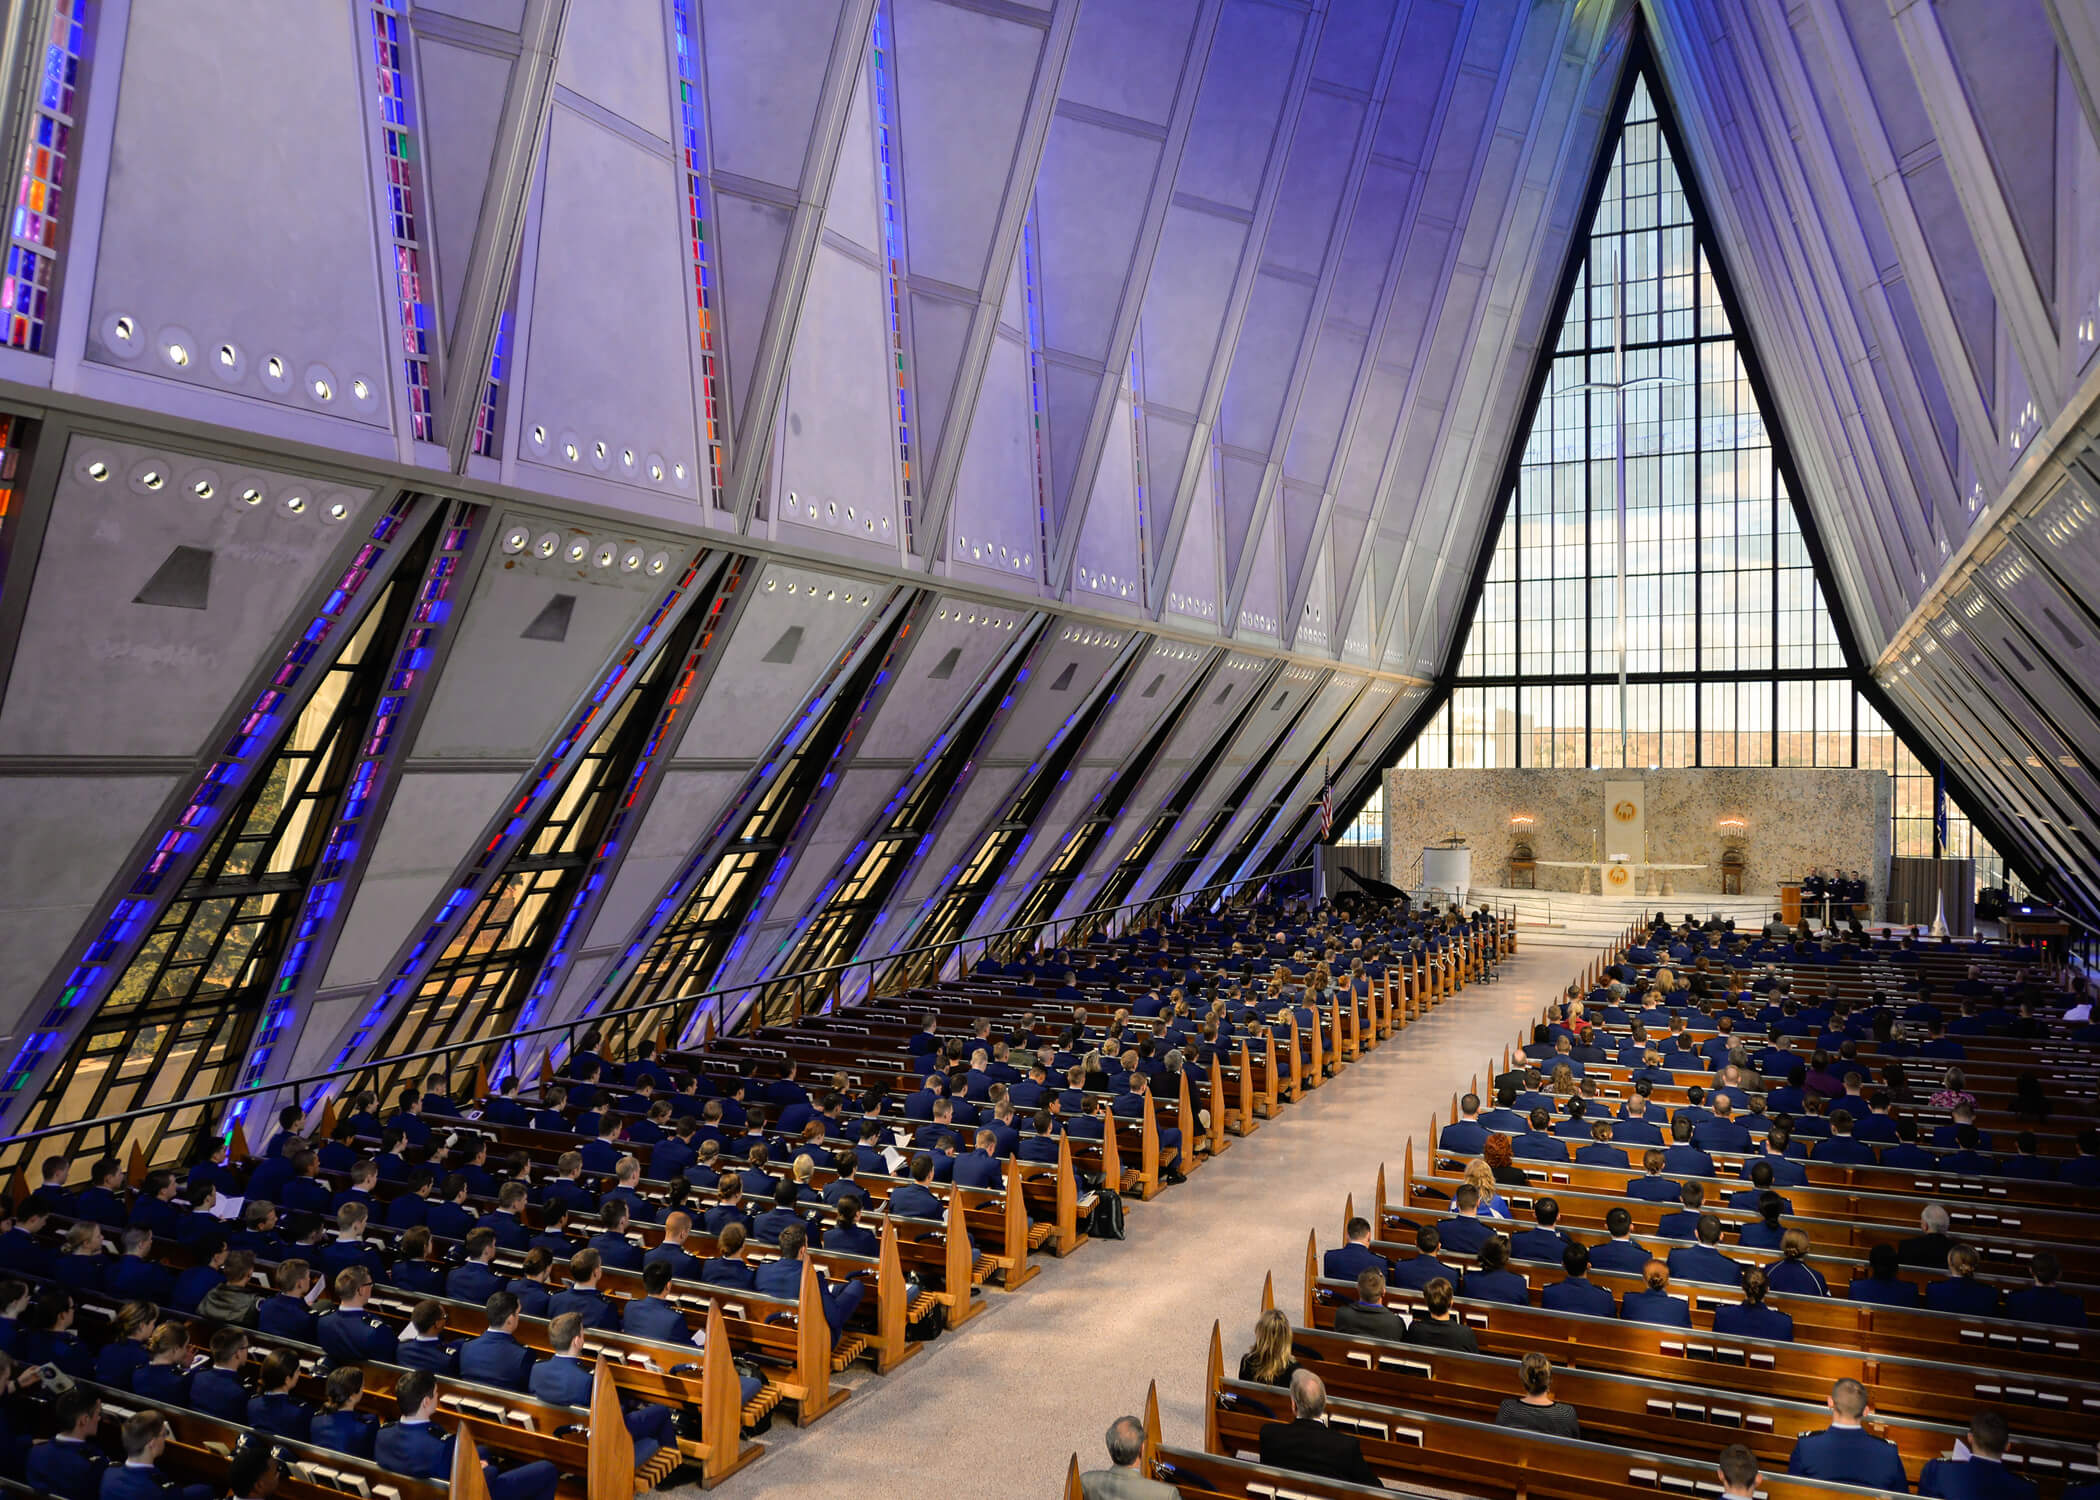 Image of a cadet chapel service at the U.S. Air Force Academy.